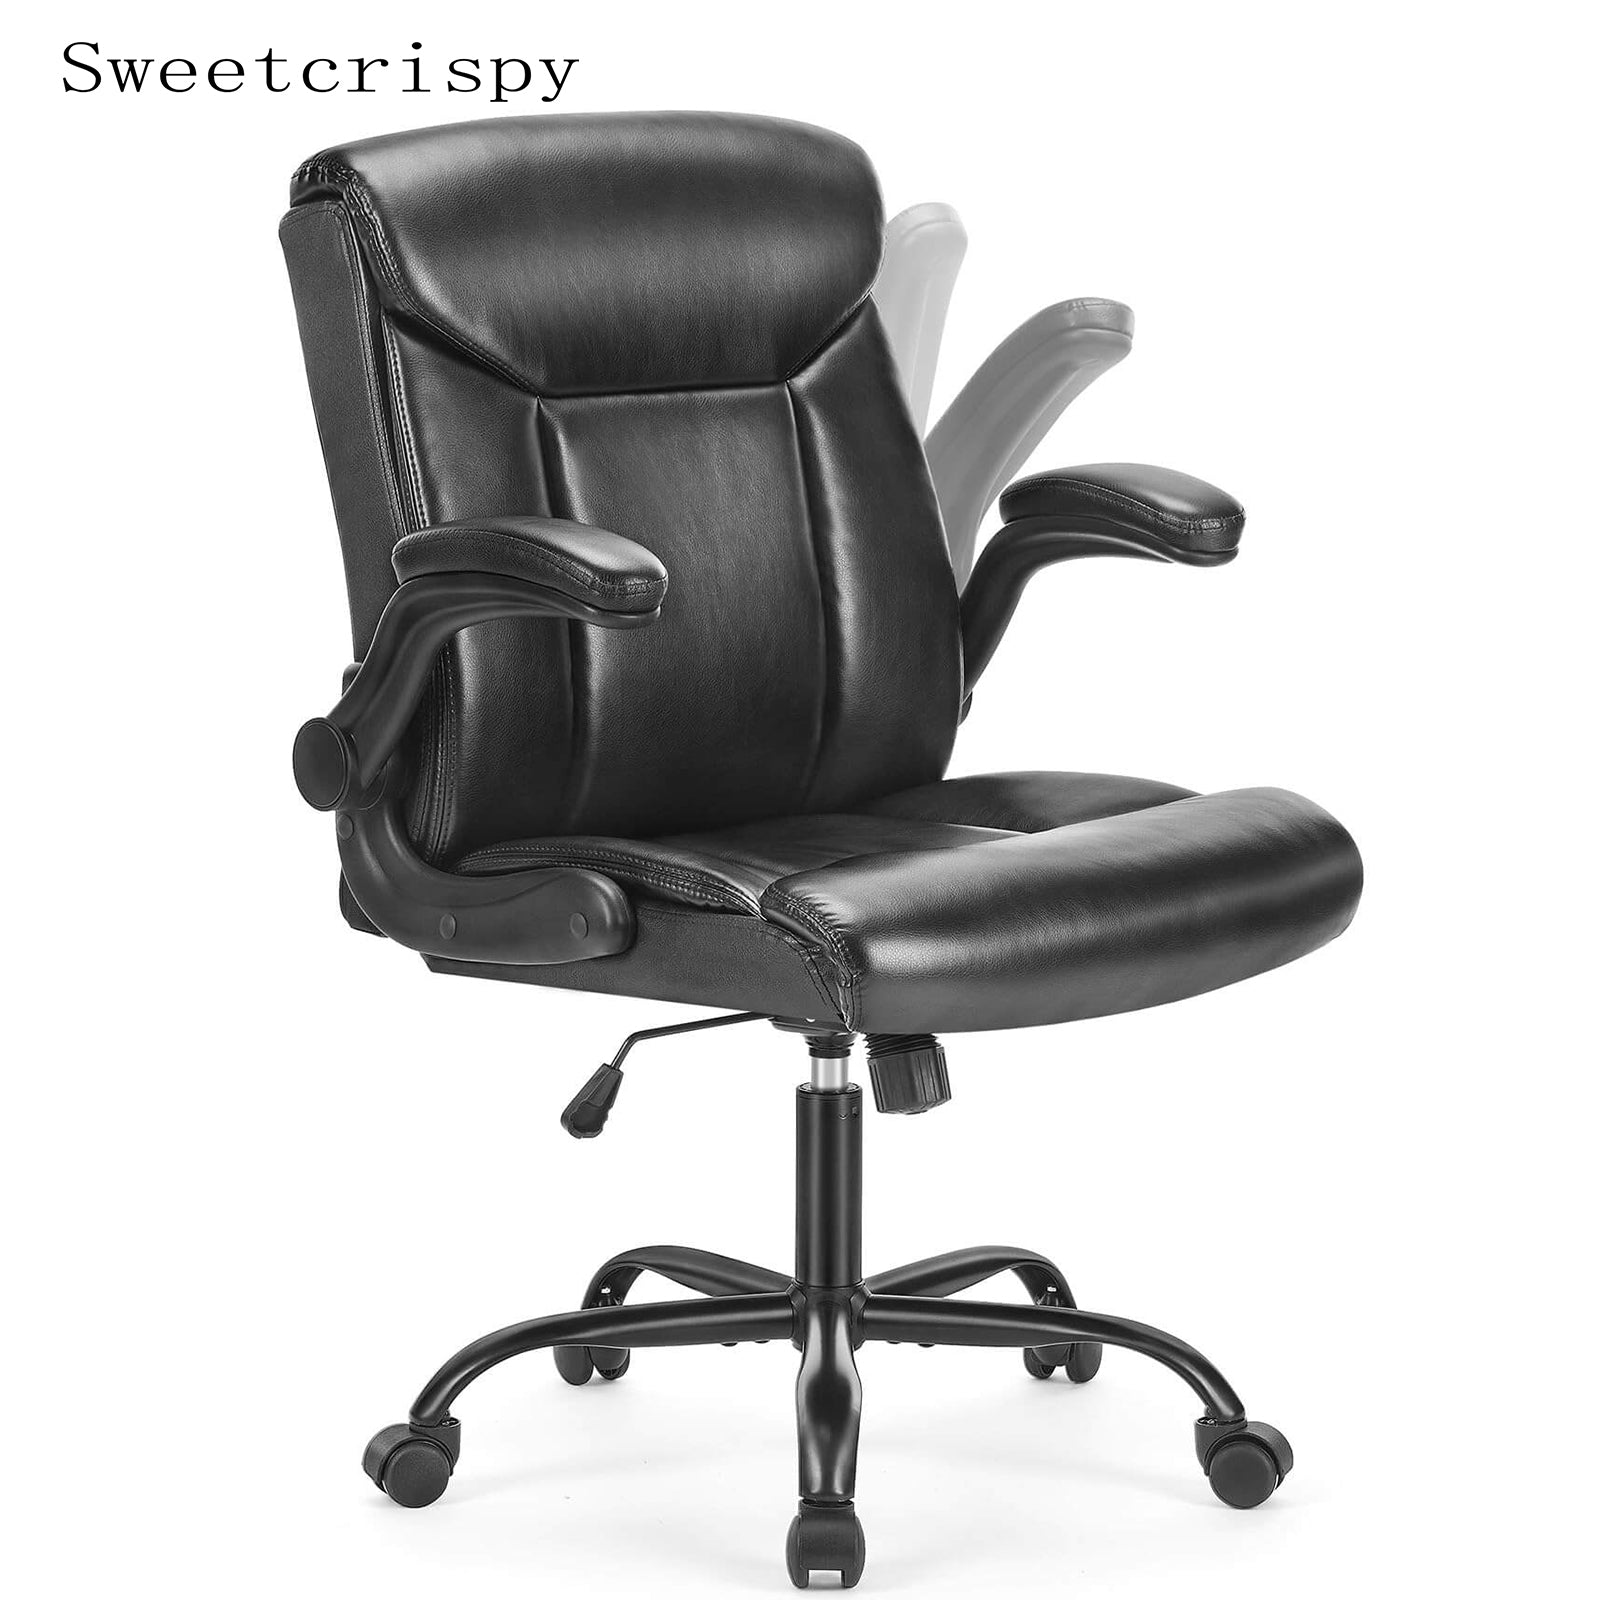 Sweetcrispy Leather Ergonomic Adjustable Computer Office Chair with Flip-up Armrest, Cushion Lumbar Back Support